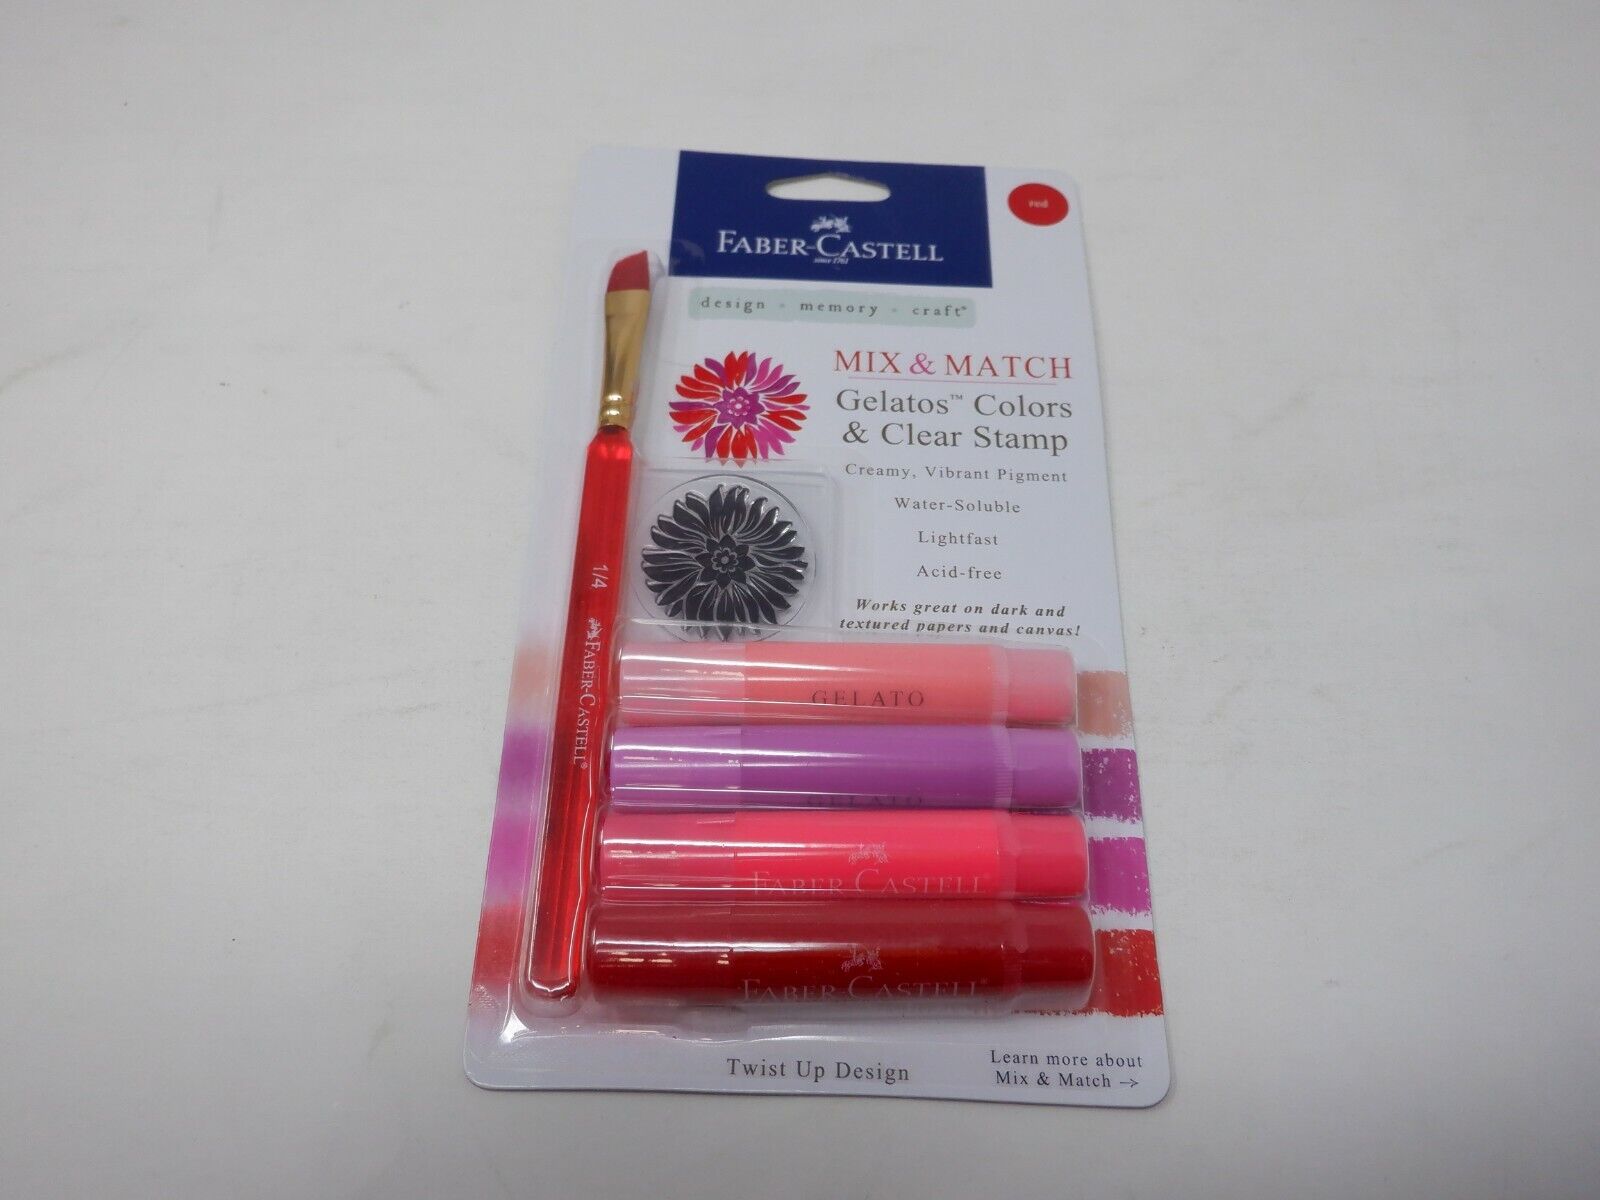 Faber-castell Mix & Match Gelatos Colors & Clear Stamp Red Craft New  Hc5423